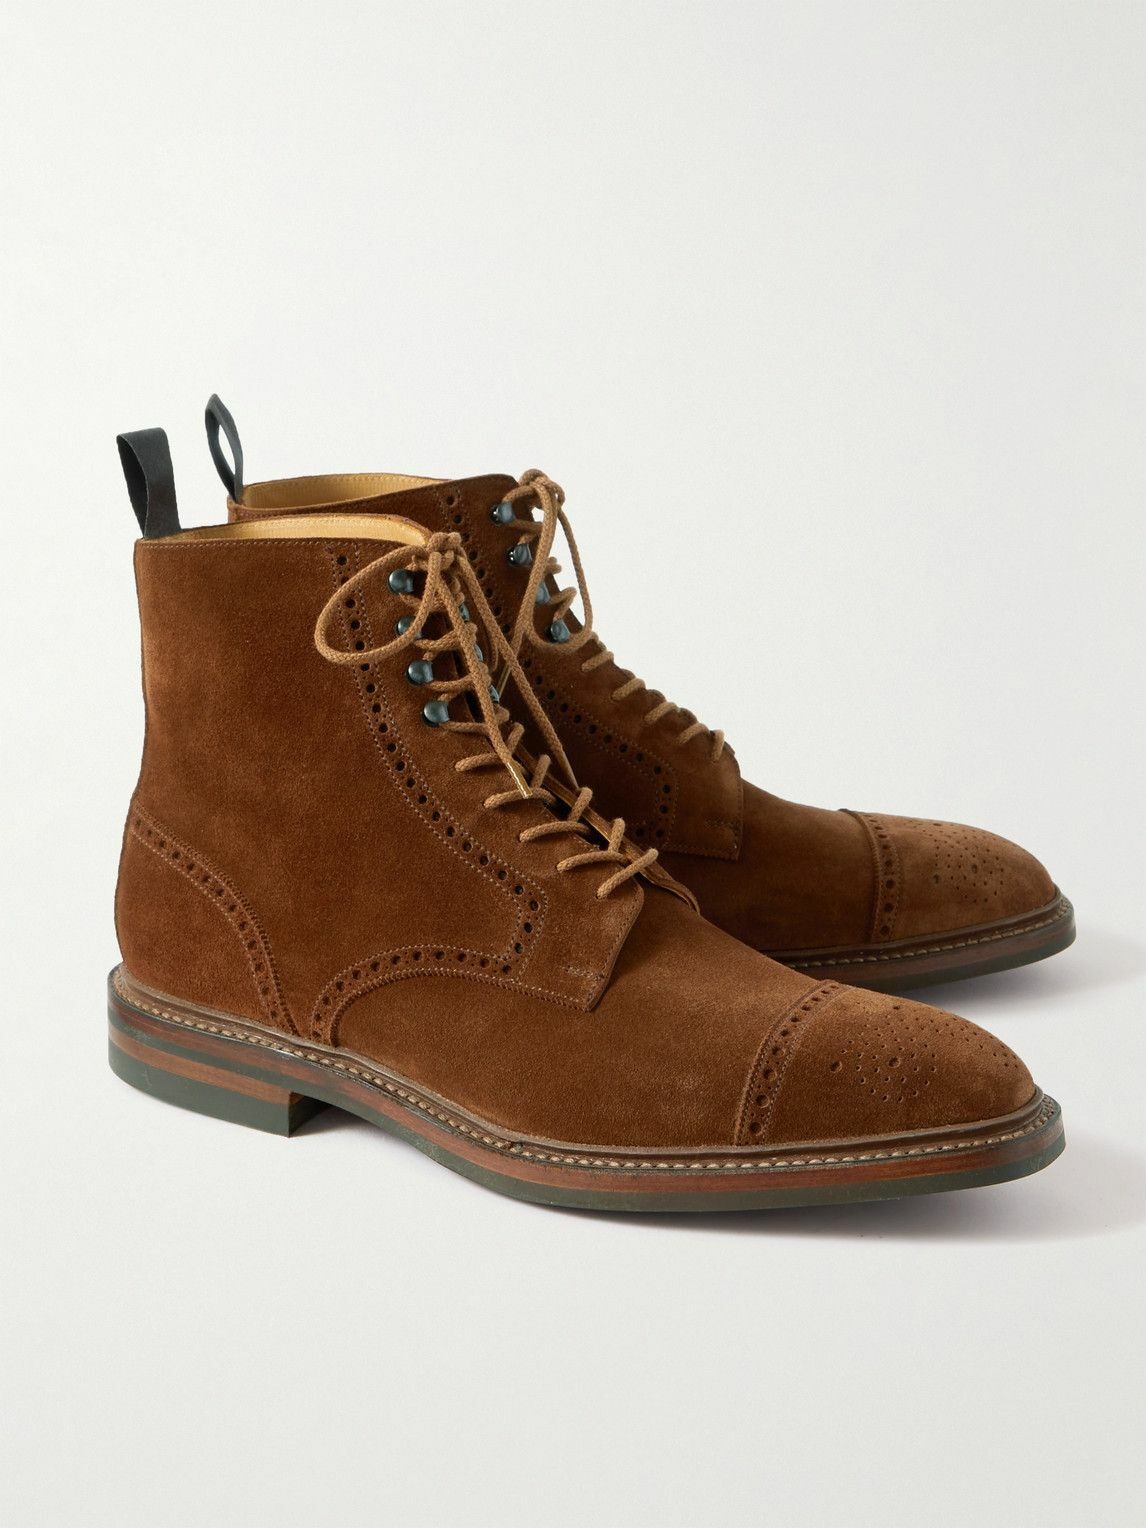 George Cleverley - Toby Suede Brogue Boots - Brown George Cleverley